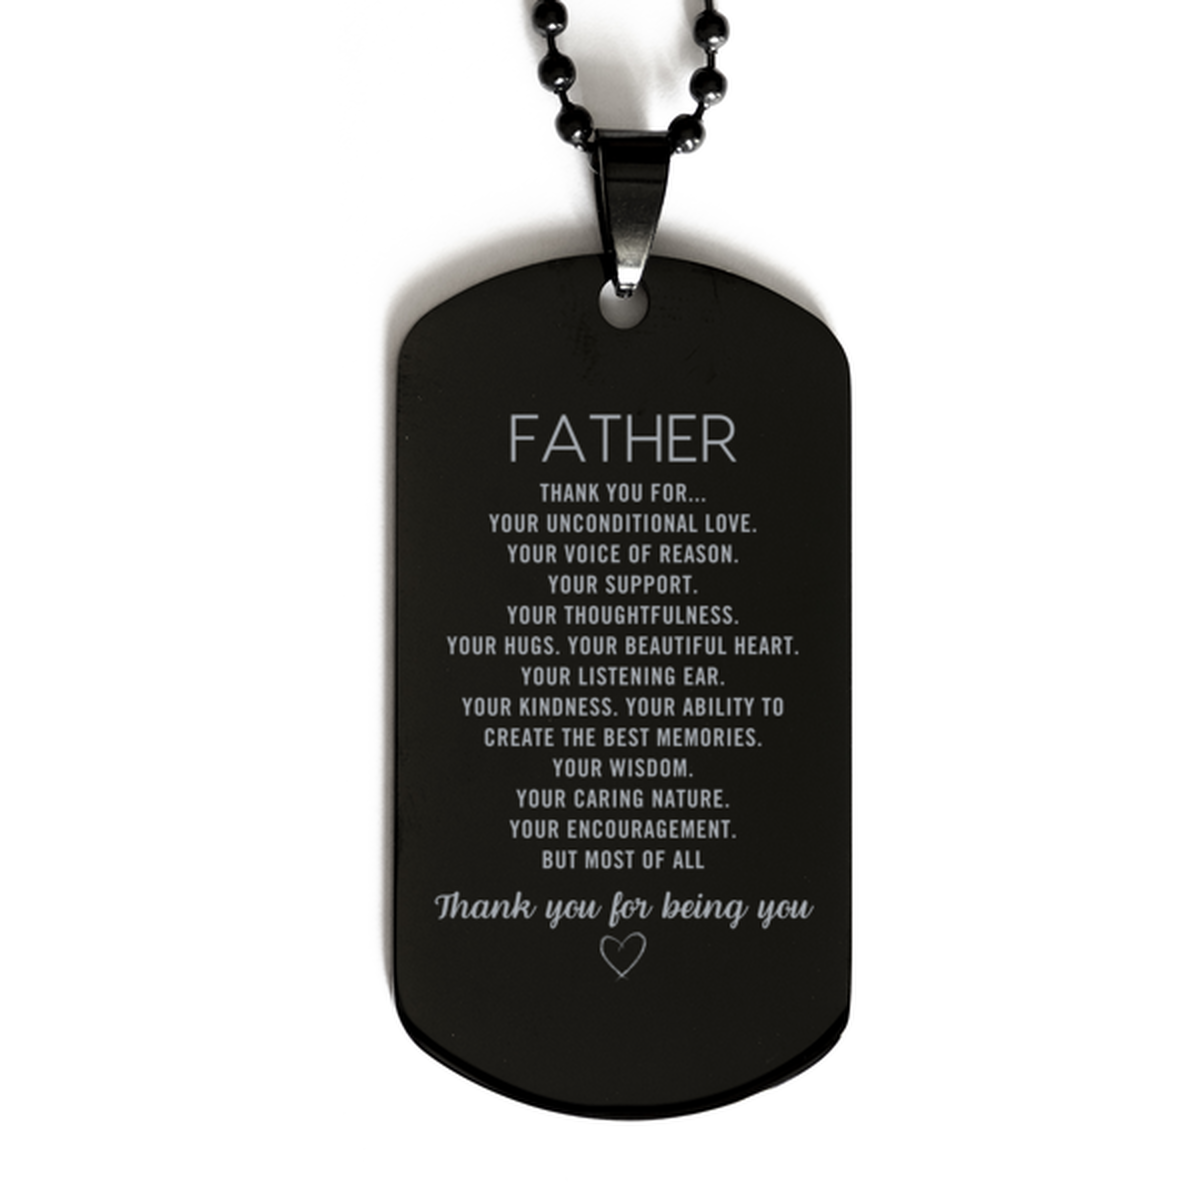 Father Black Dog Tag Custom, Engraved Gifts For Father Christmas Graduation Birthday Gifts for Men Women Father Thank you for Your unconditional love